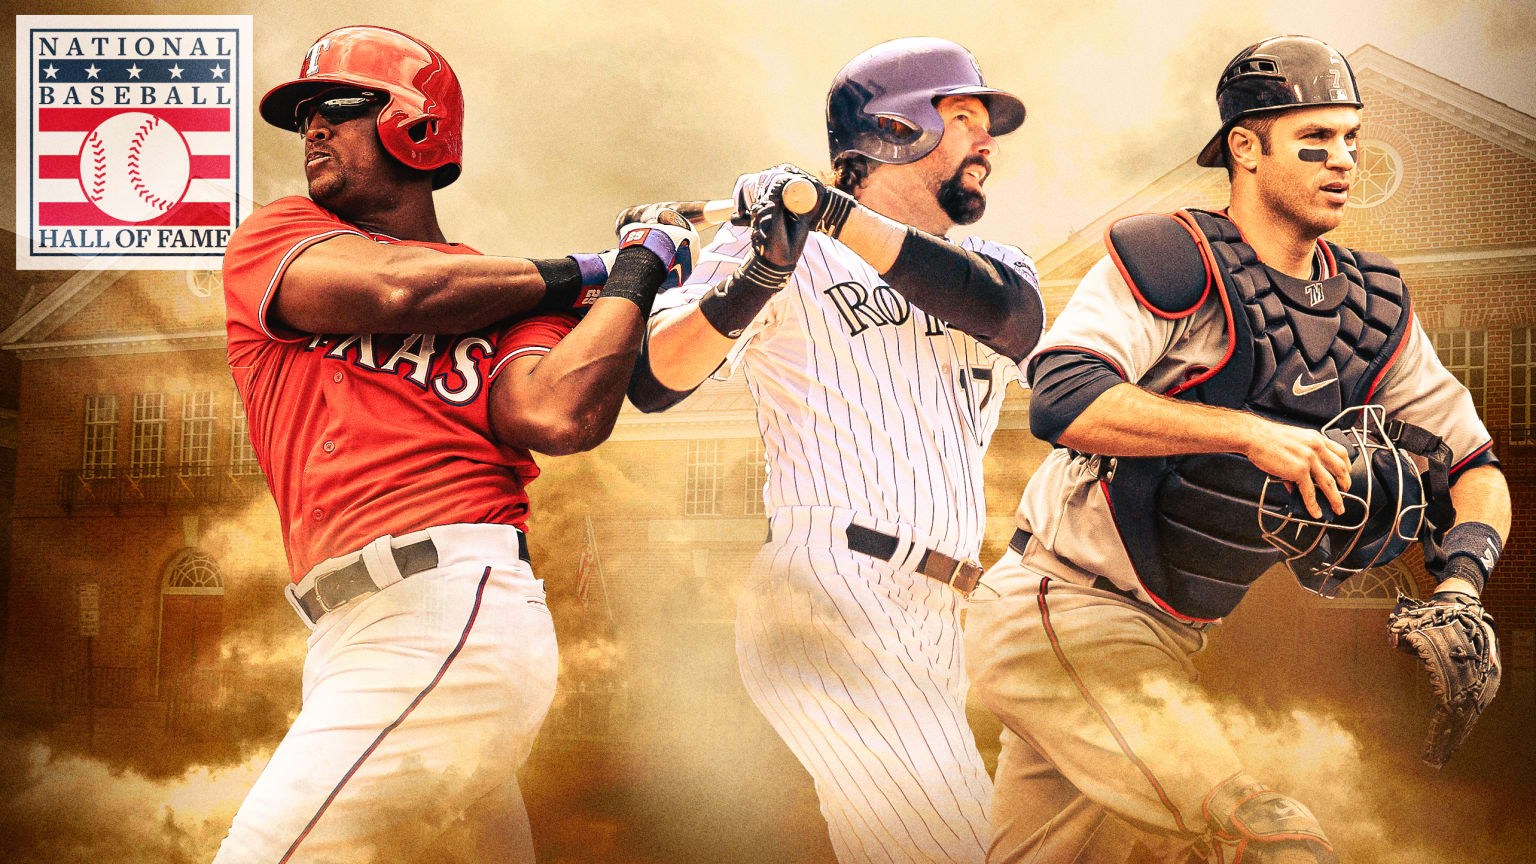 Designed image showing Adrián Beltré, Todd Helton and Joe Mauer with a Hall of Fame logo